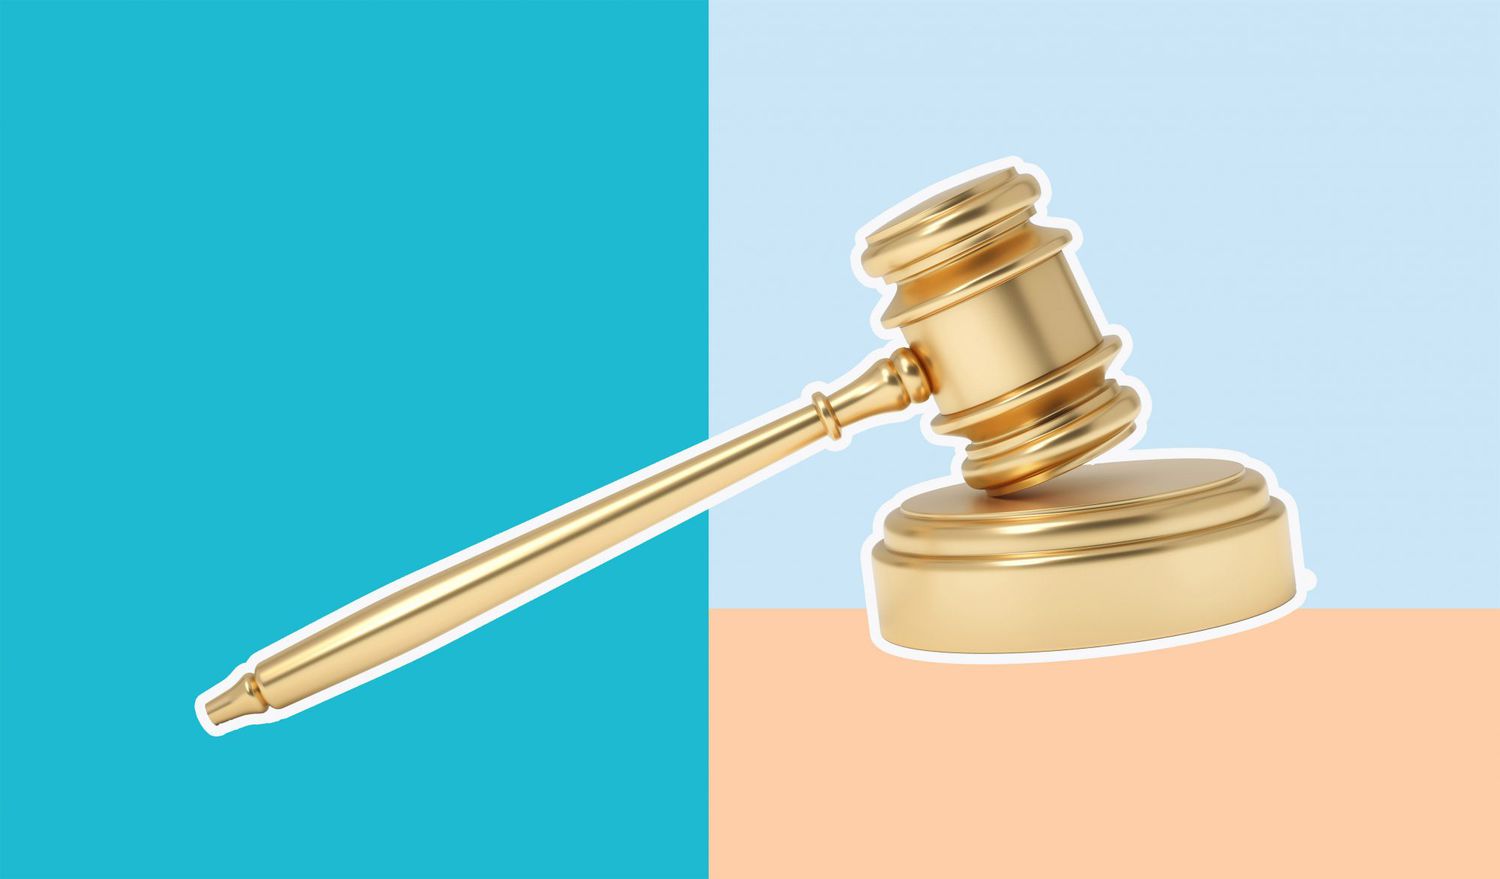 An image of a gavel on a colored background.